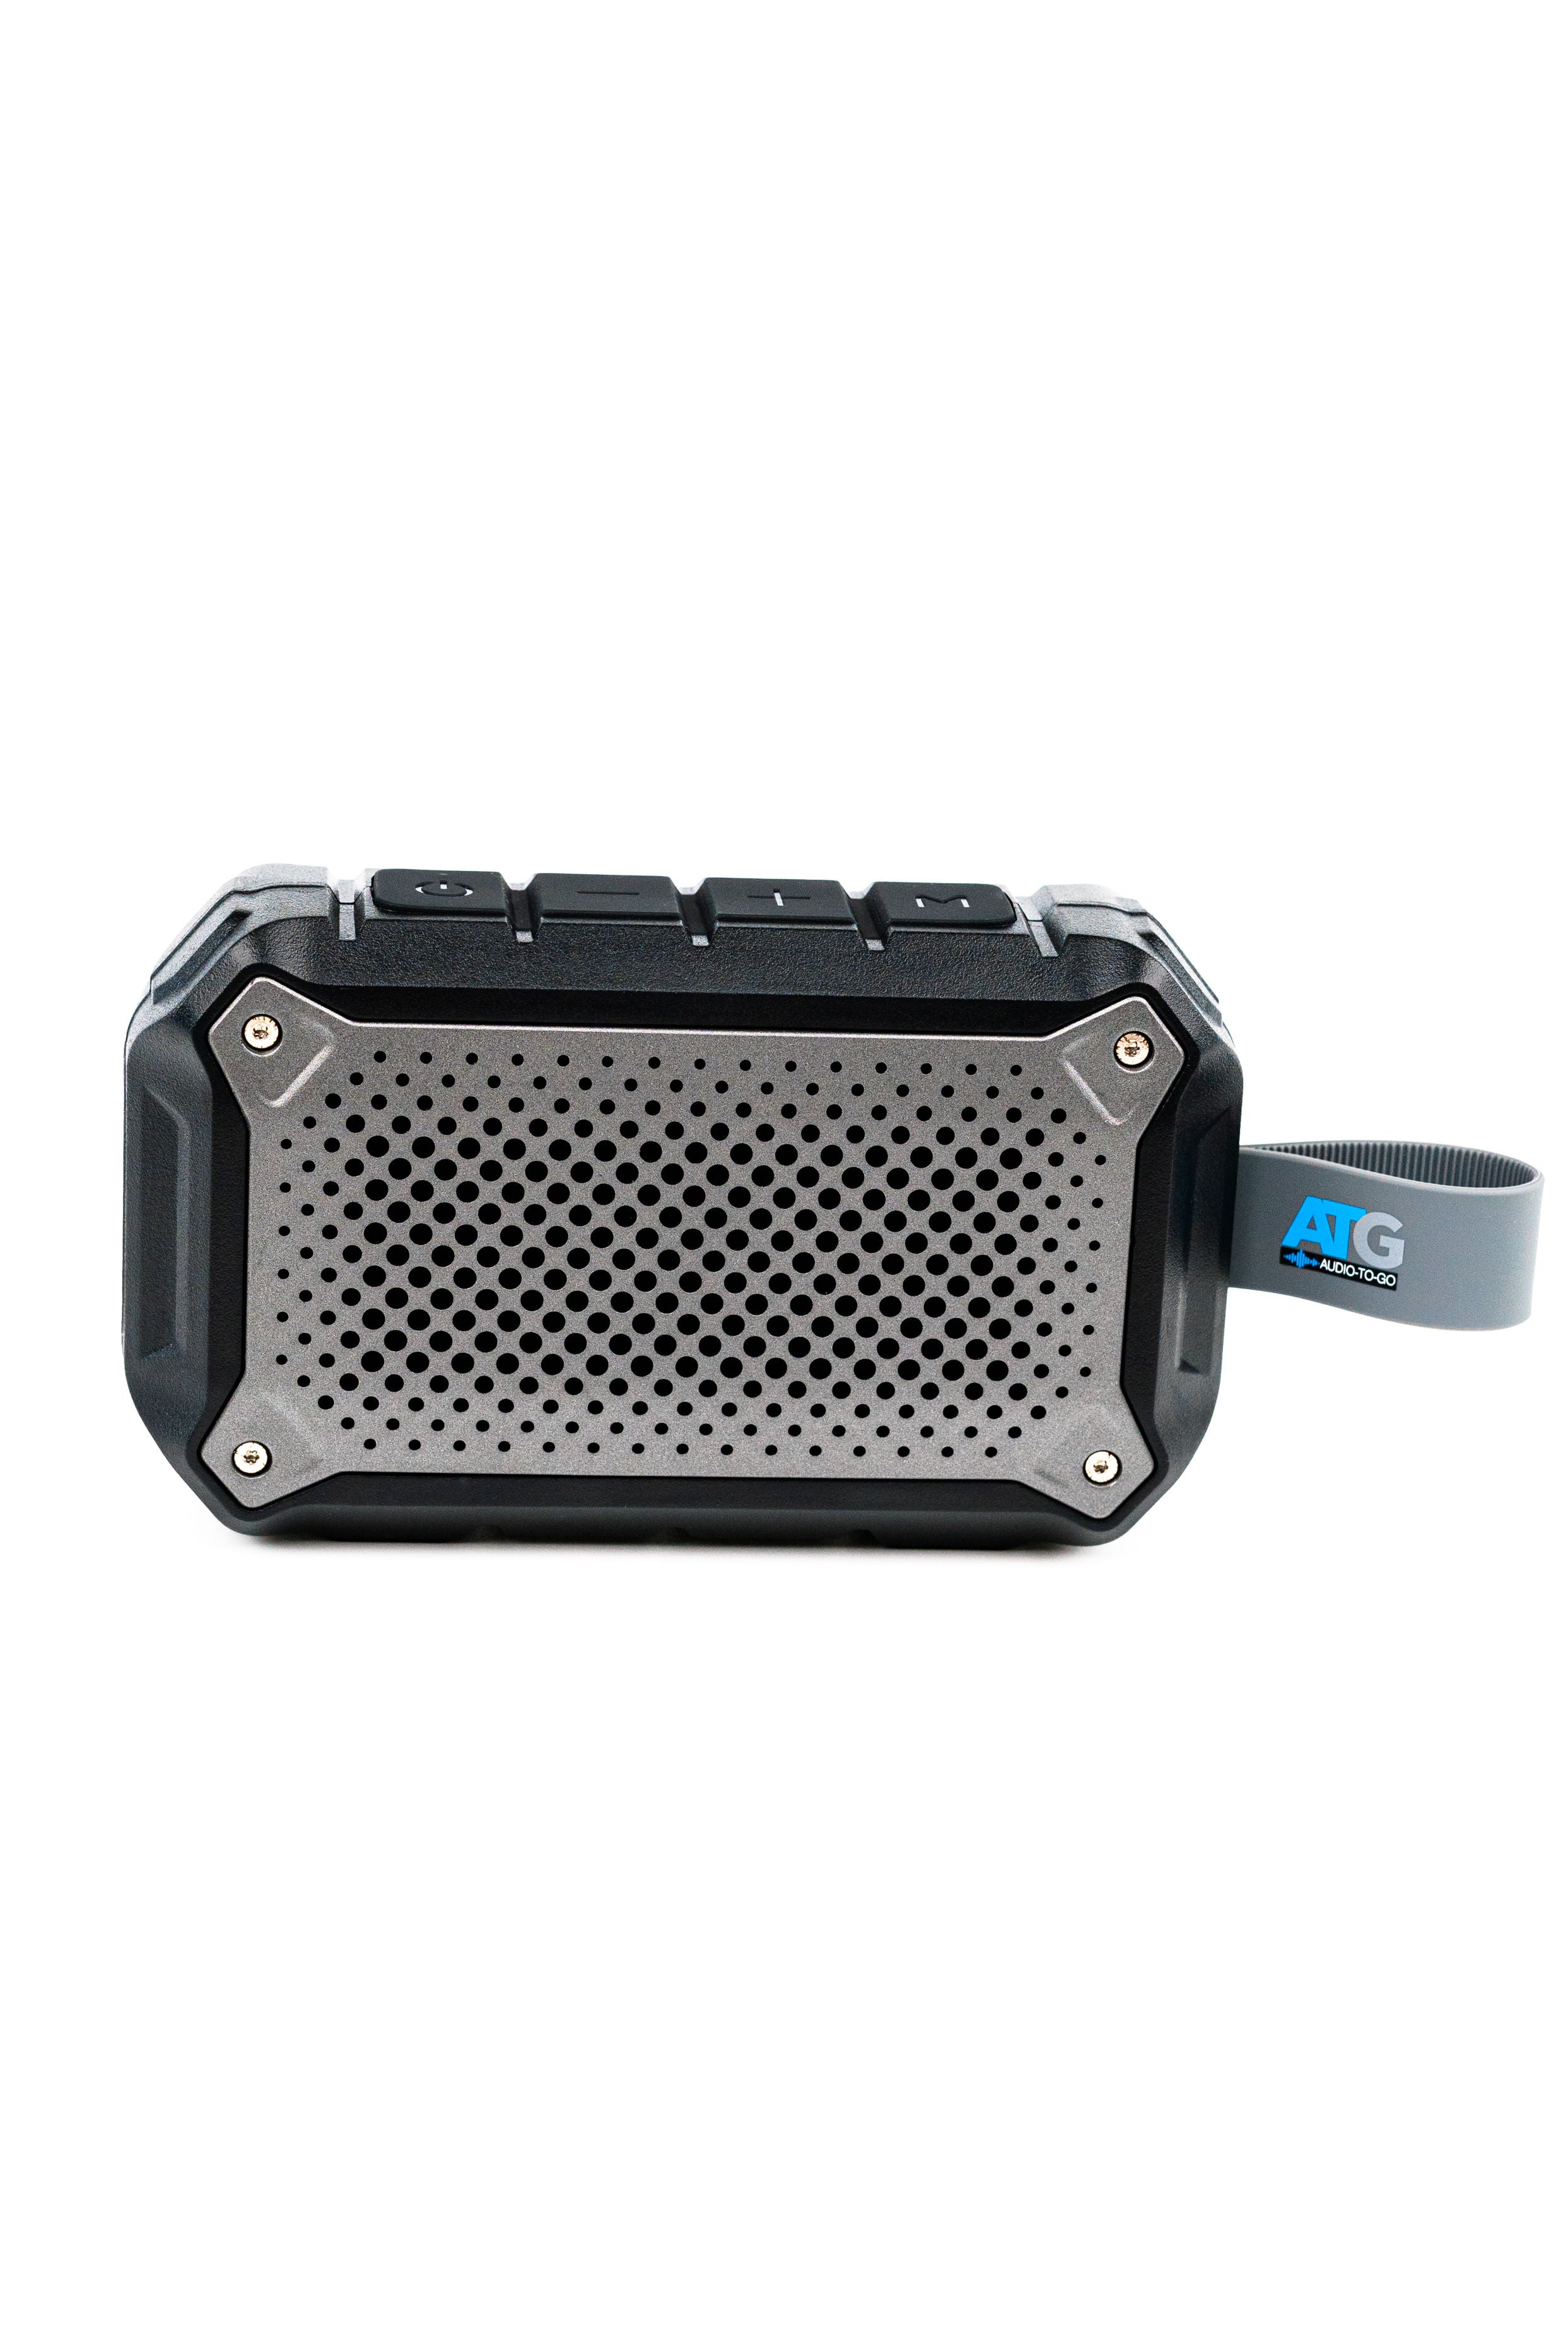 ATG SYDKIK - IPX6 Water-Proof Bluetooth 5.0 Speaker with TWS Function